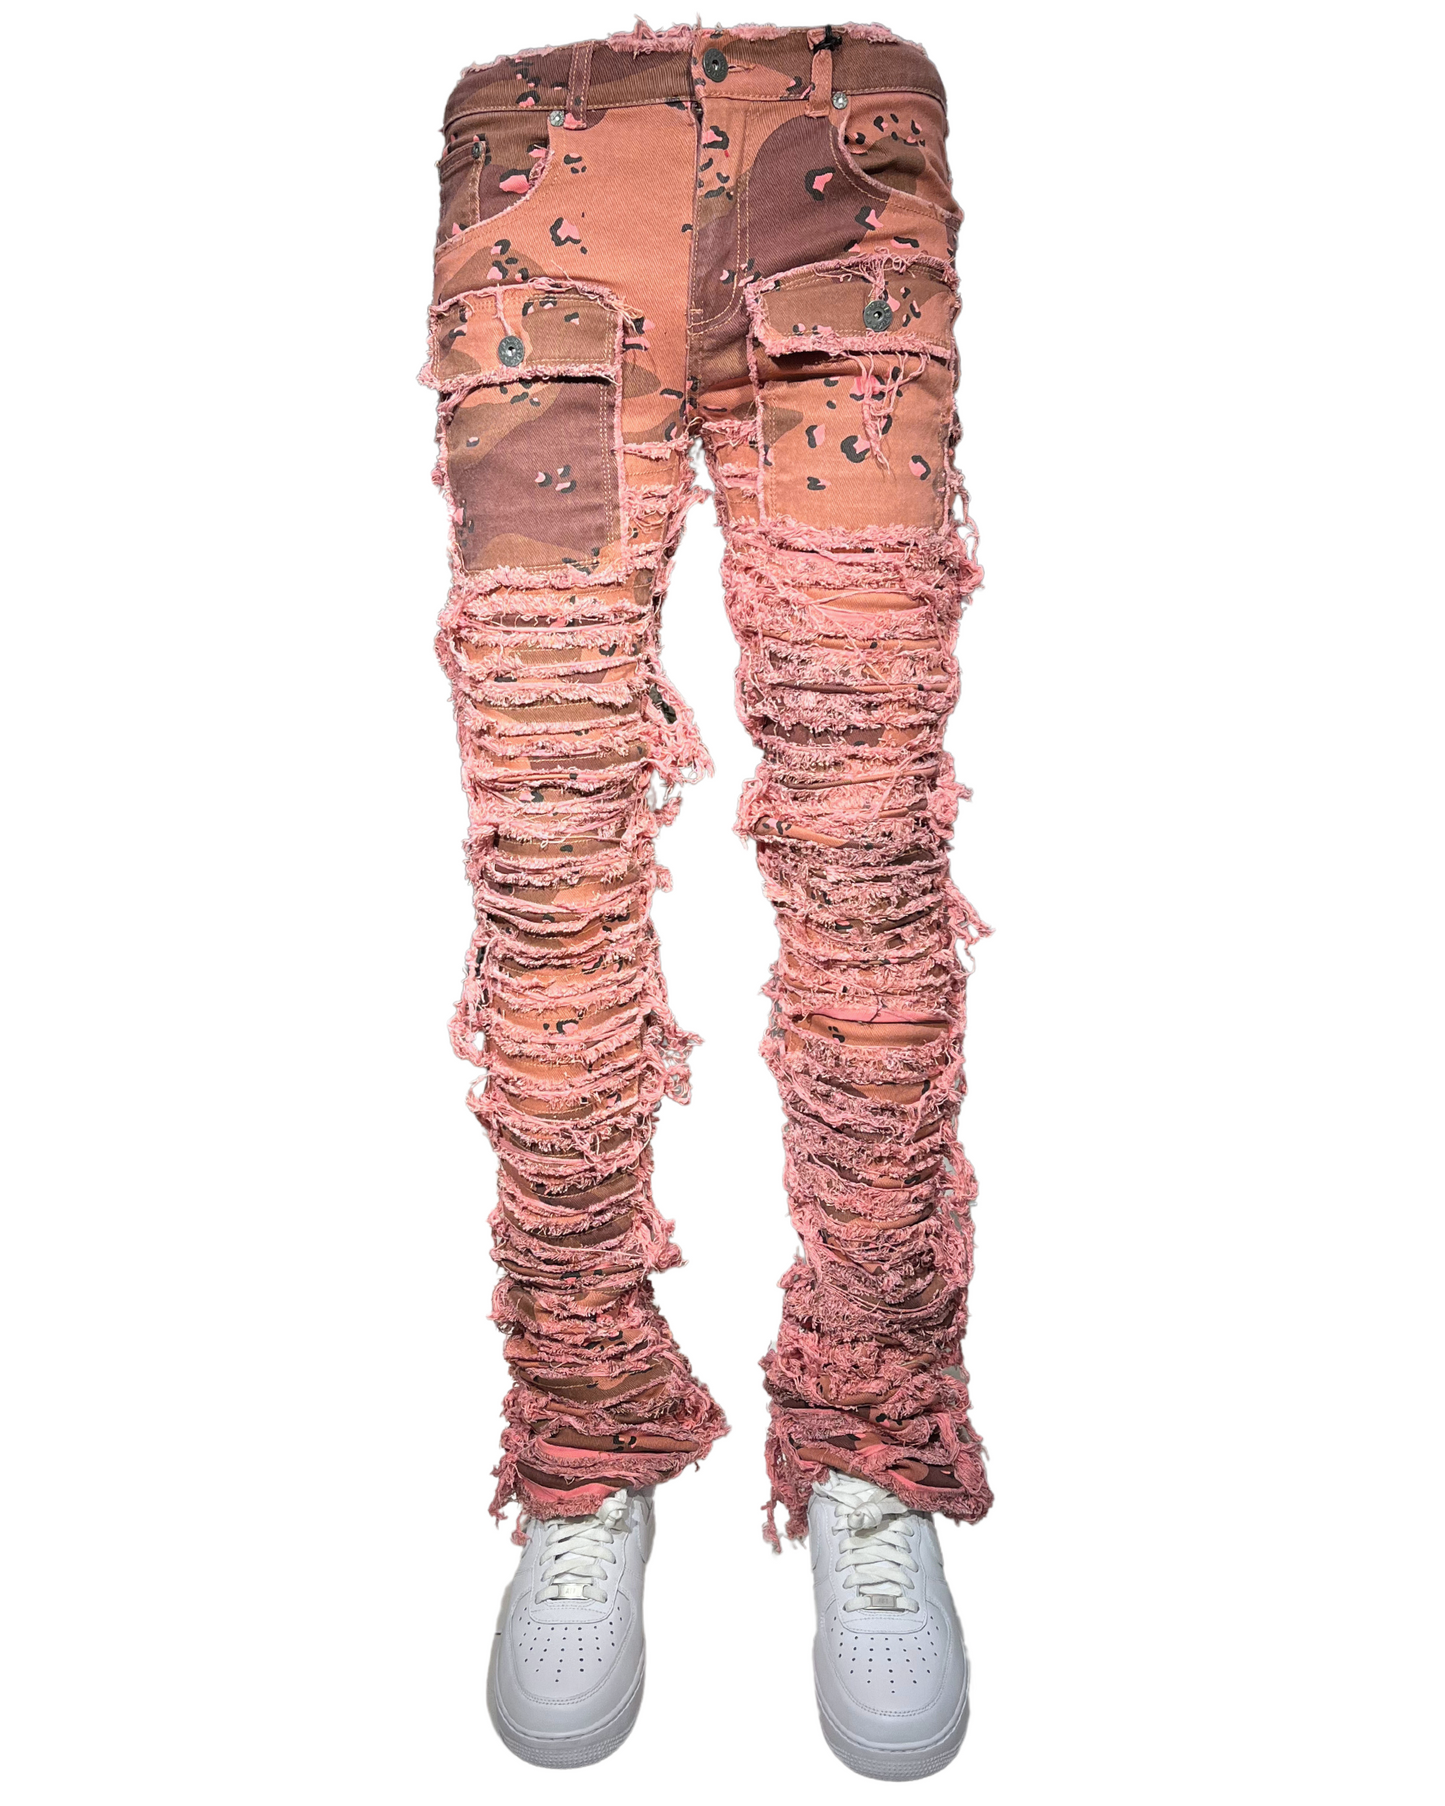 Nirvana Rip & Frayed Camo Stacked Jeans DL2260